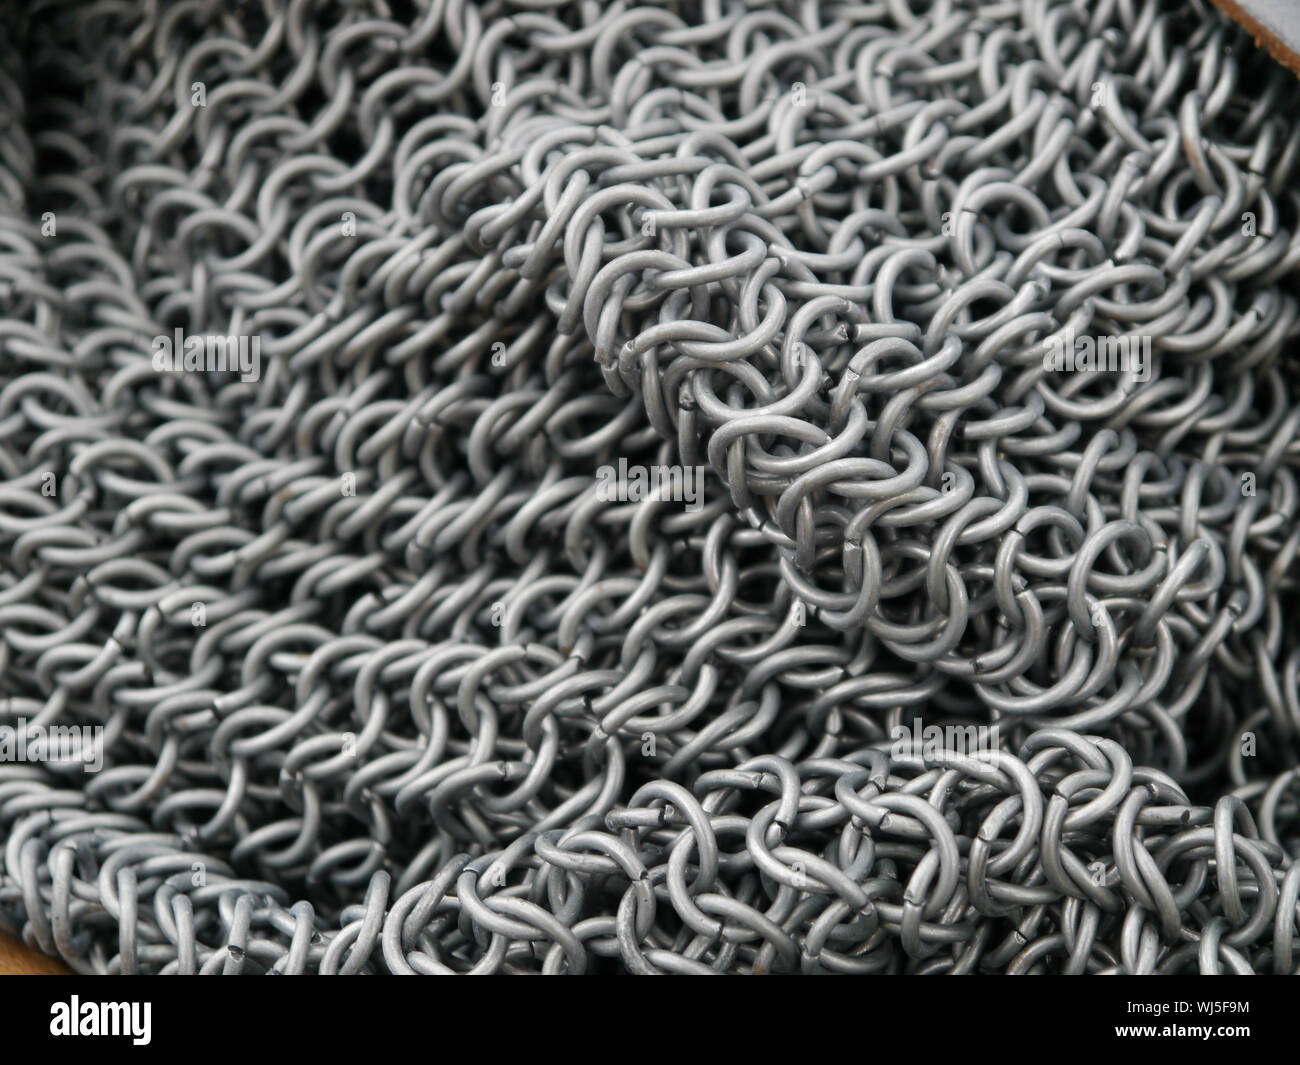 https://c8.alamy.com/comp/WJ5F9M/close-up-of-the-links-that-make-up-chain-mail-armour-WJ5F9M.jpg